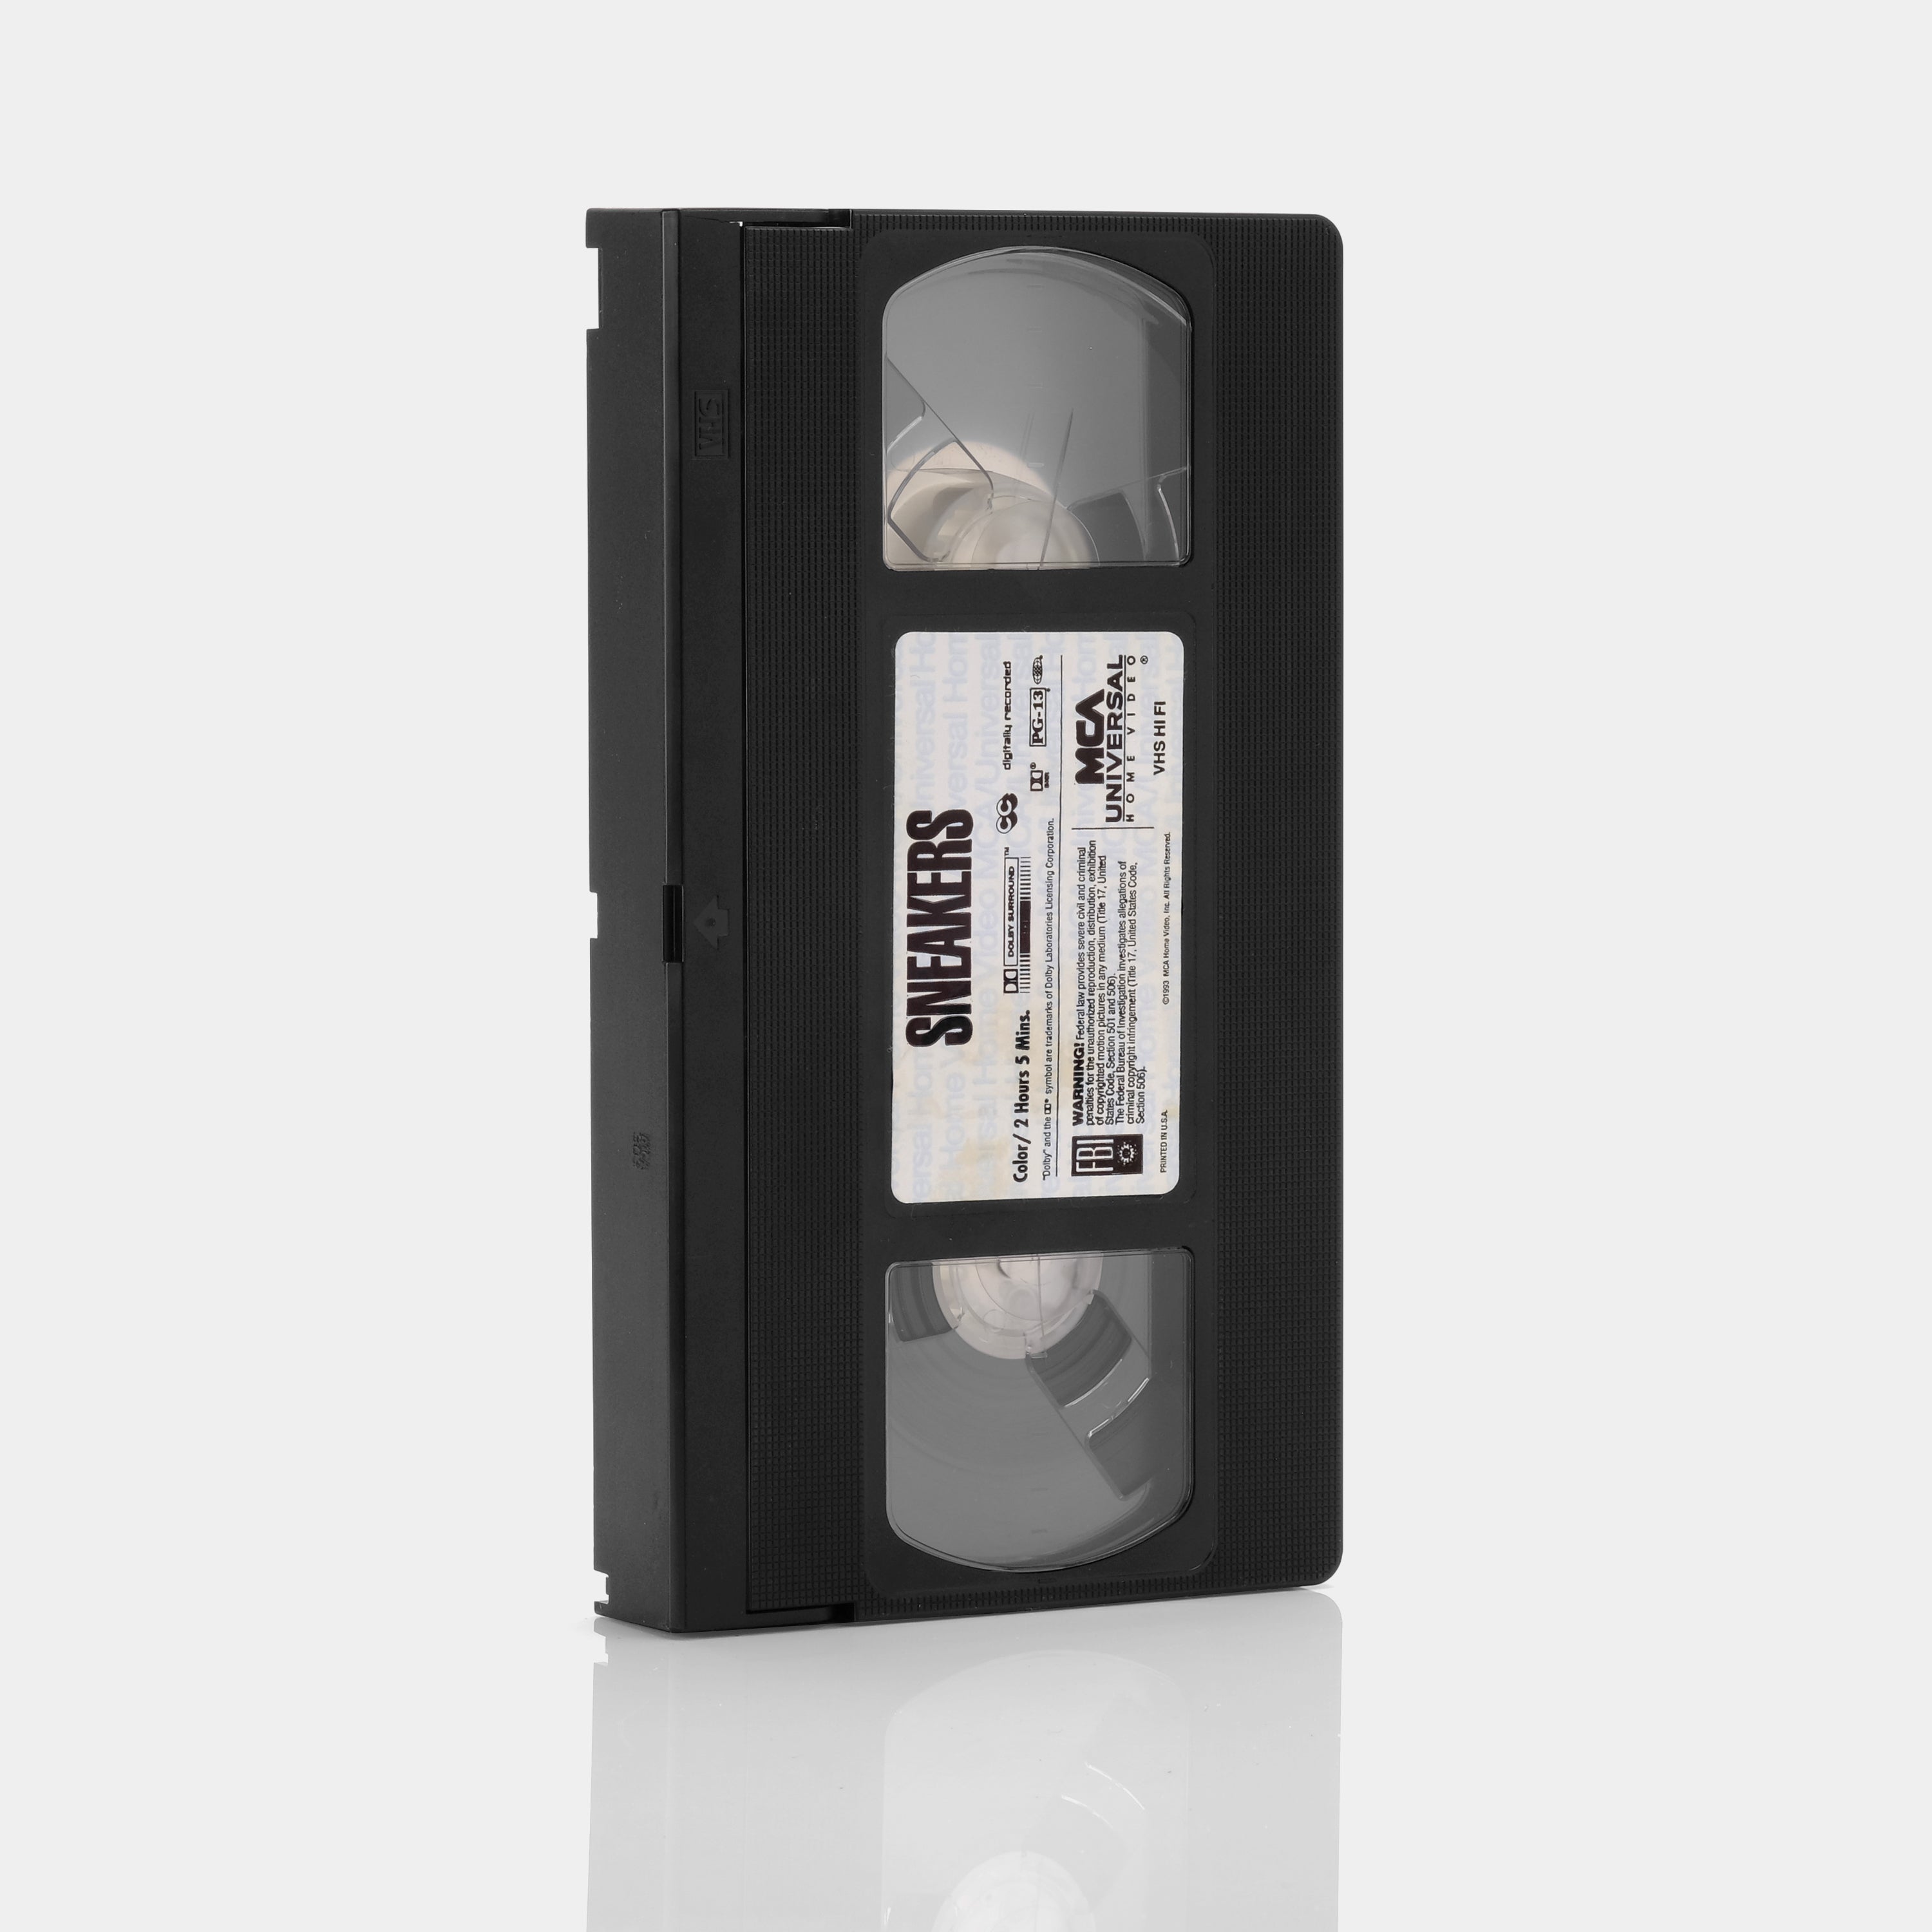 Sneakers VHS Tape